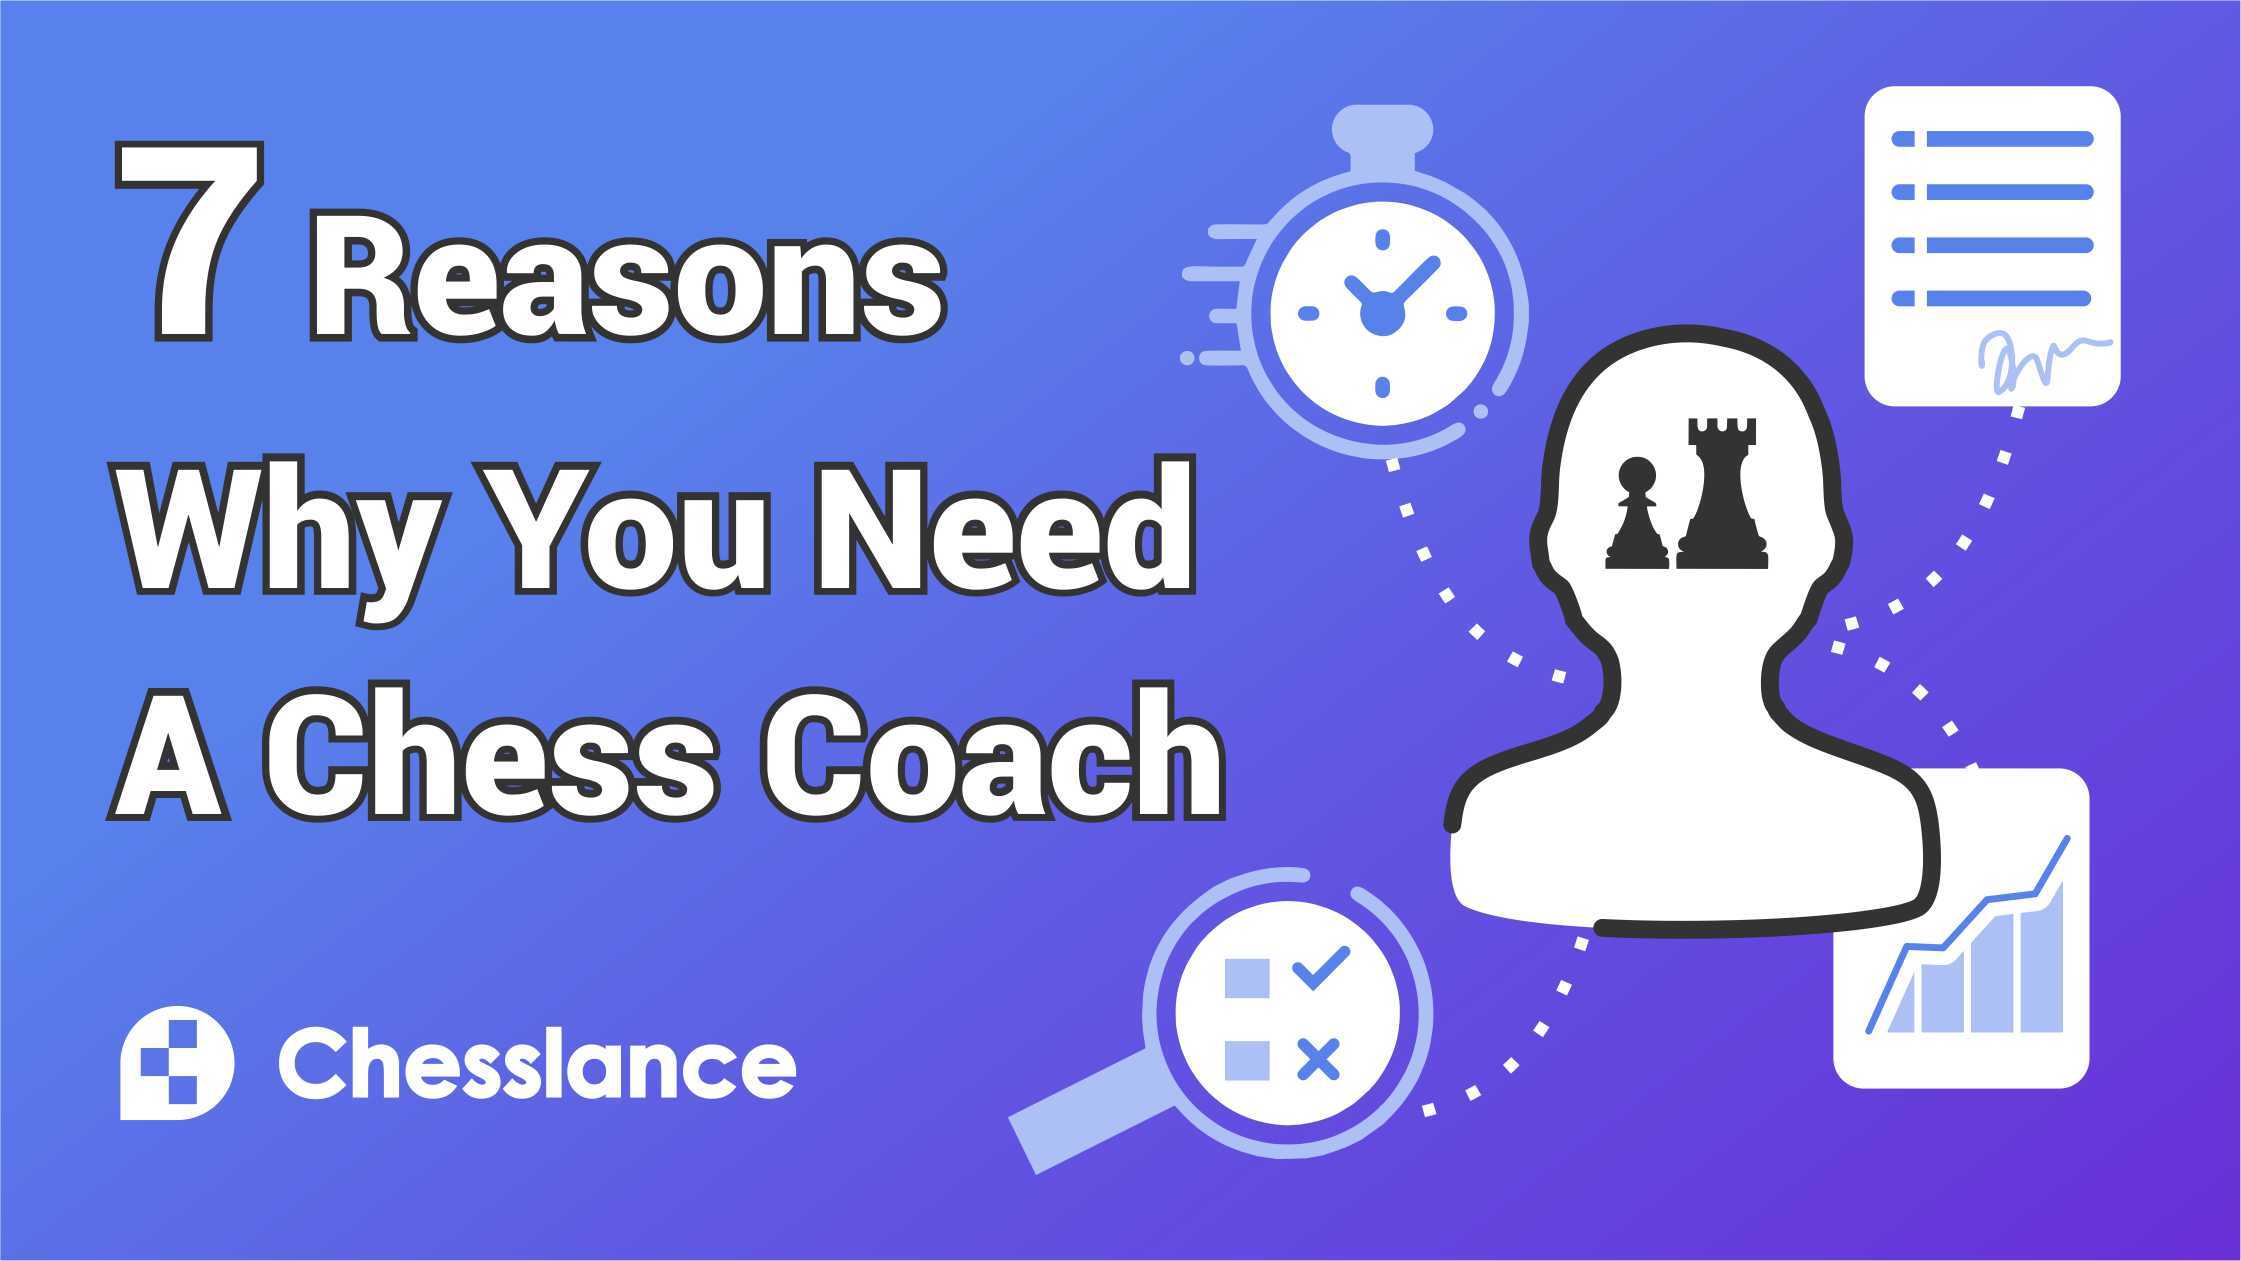 7 Reasons Why You Need a Chess Coach